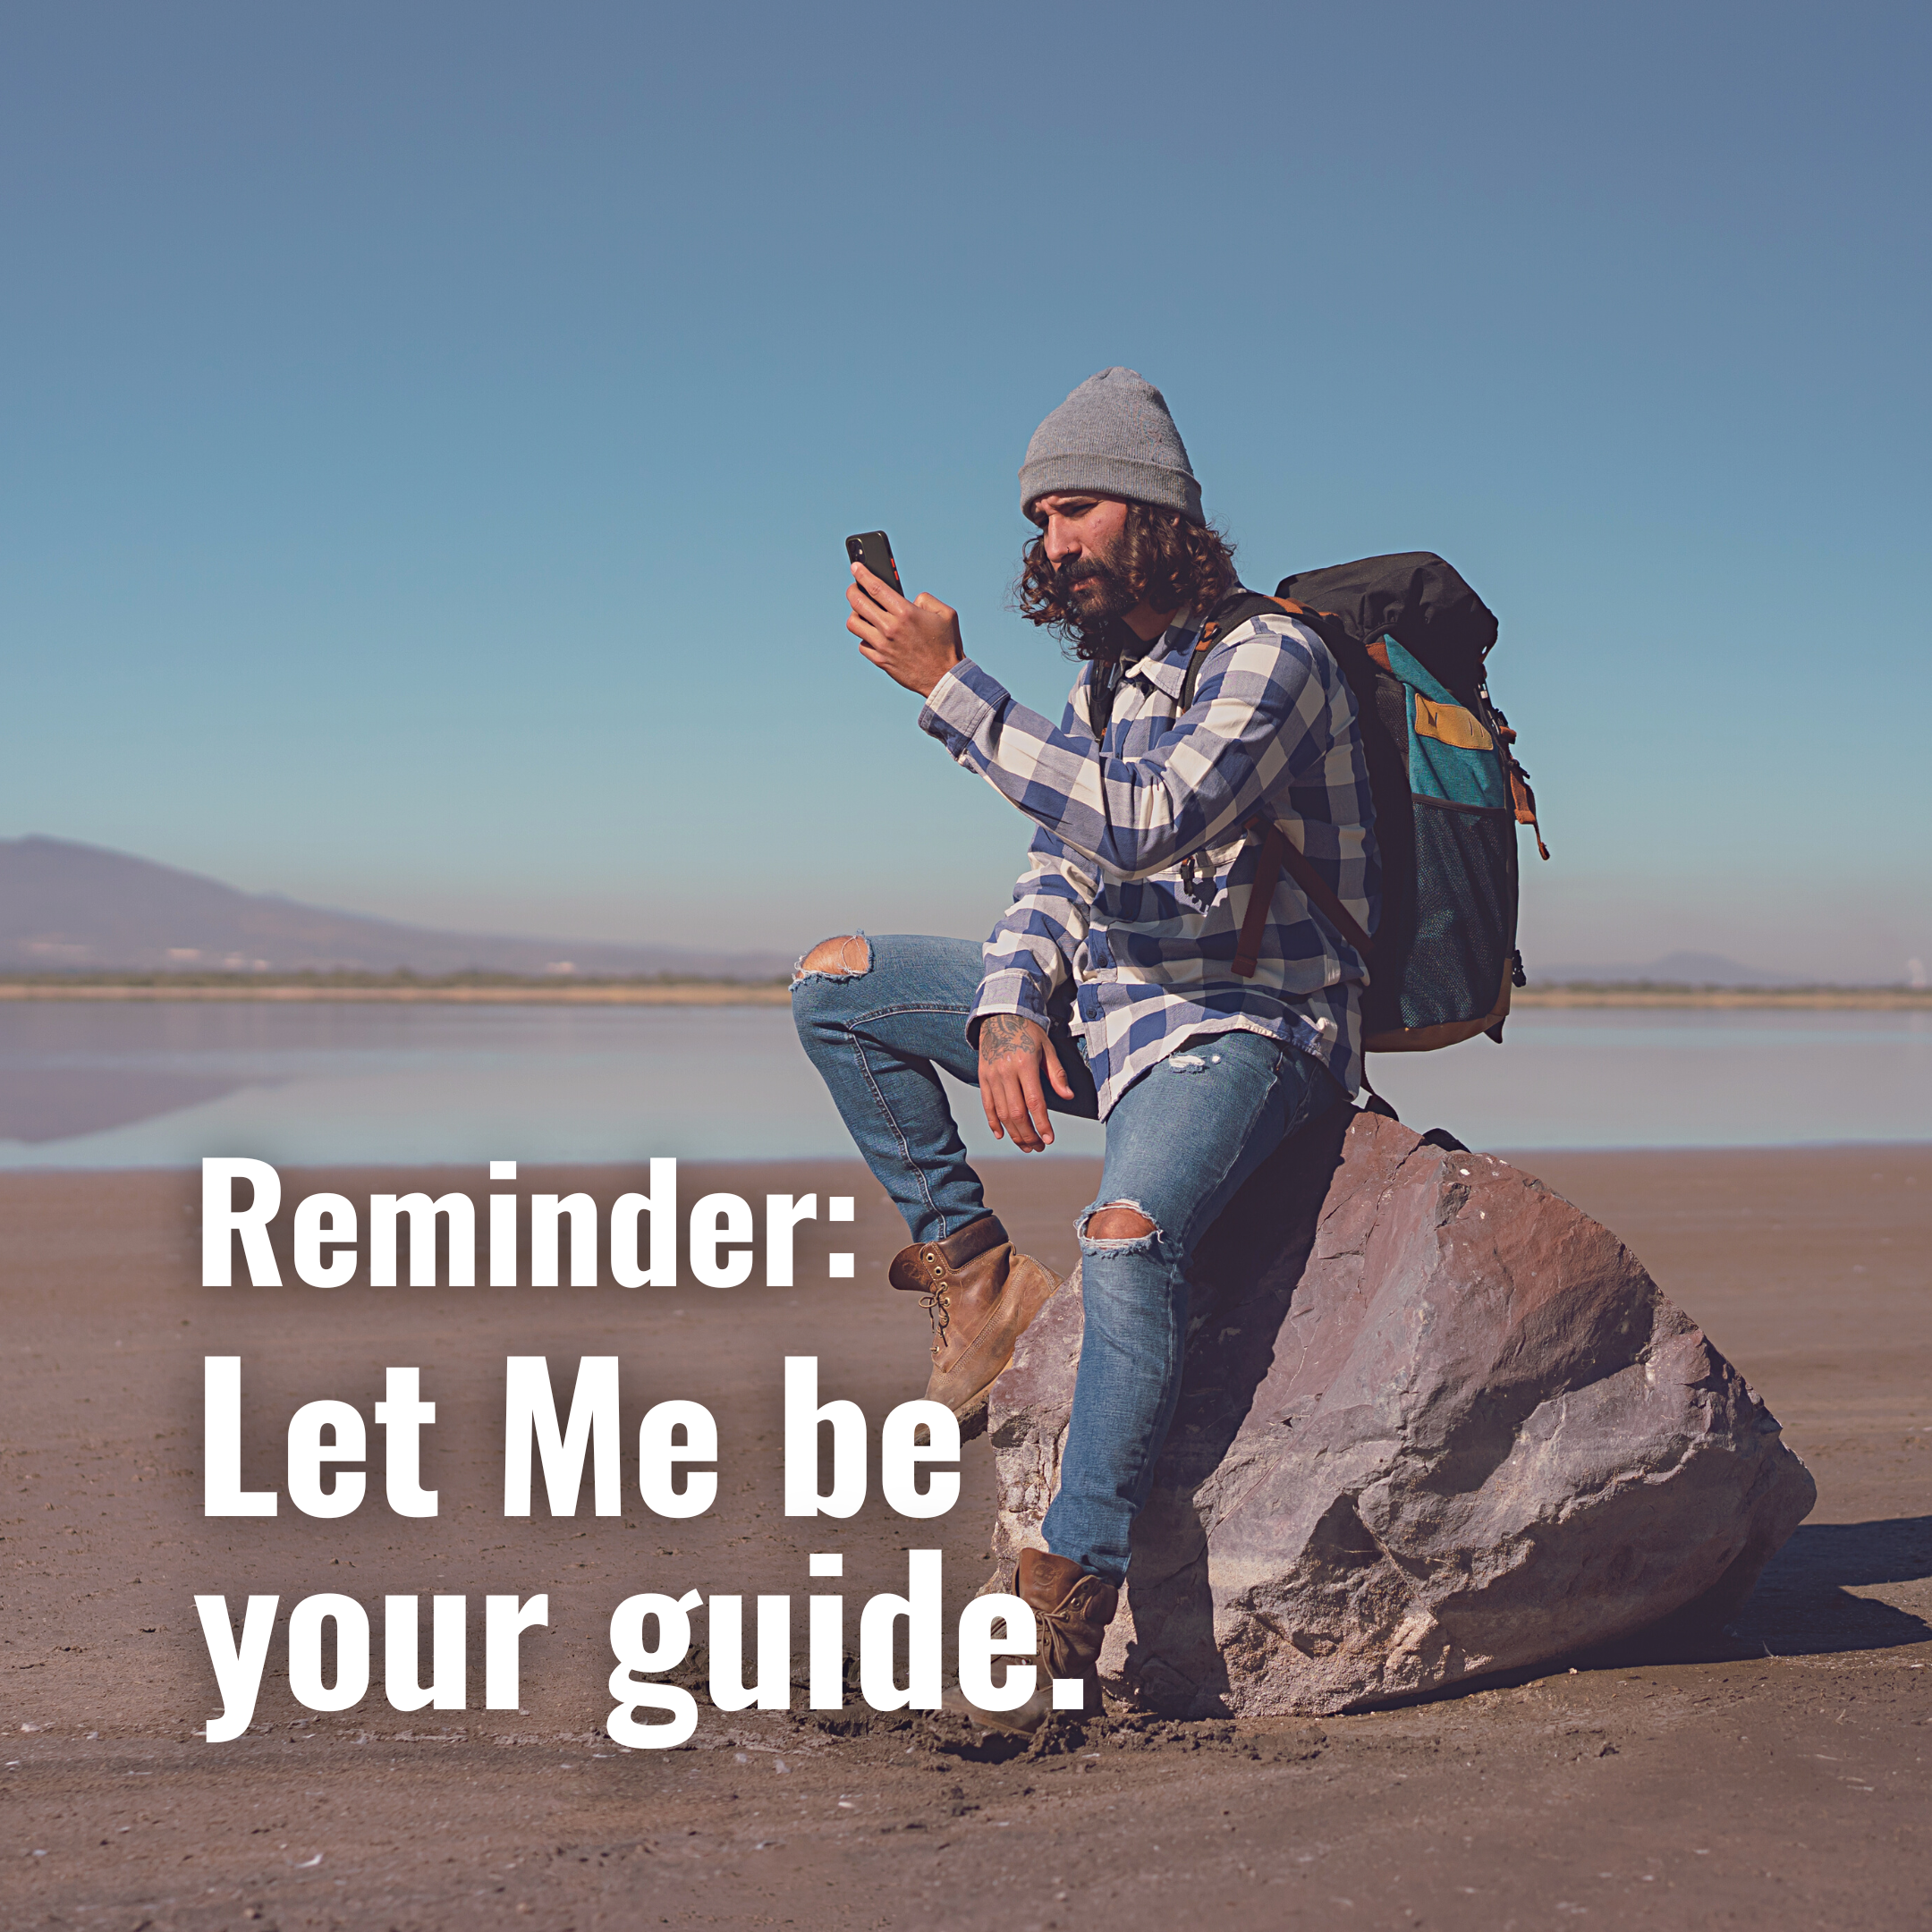 Let Me be your guide.